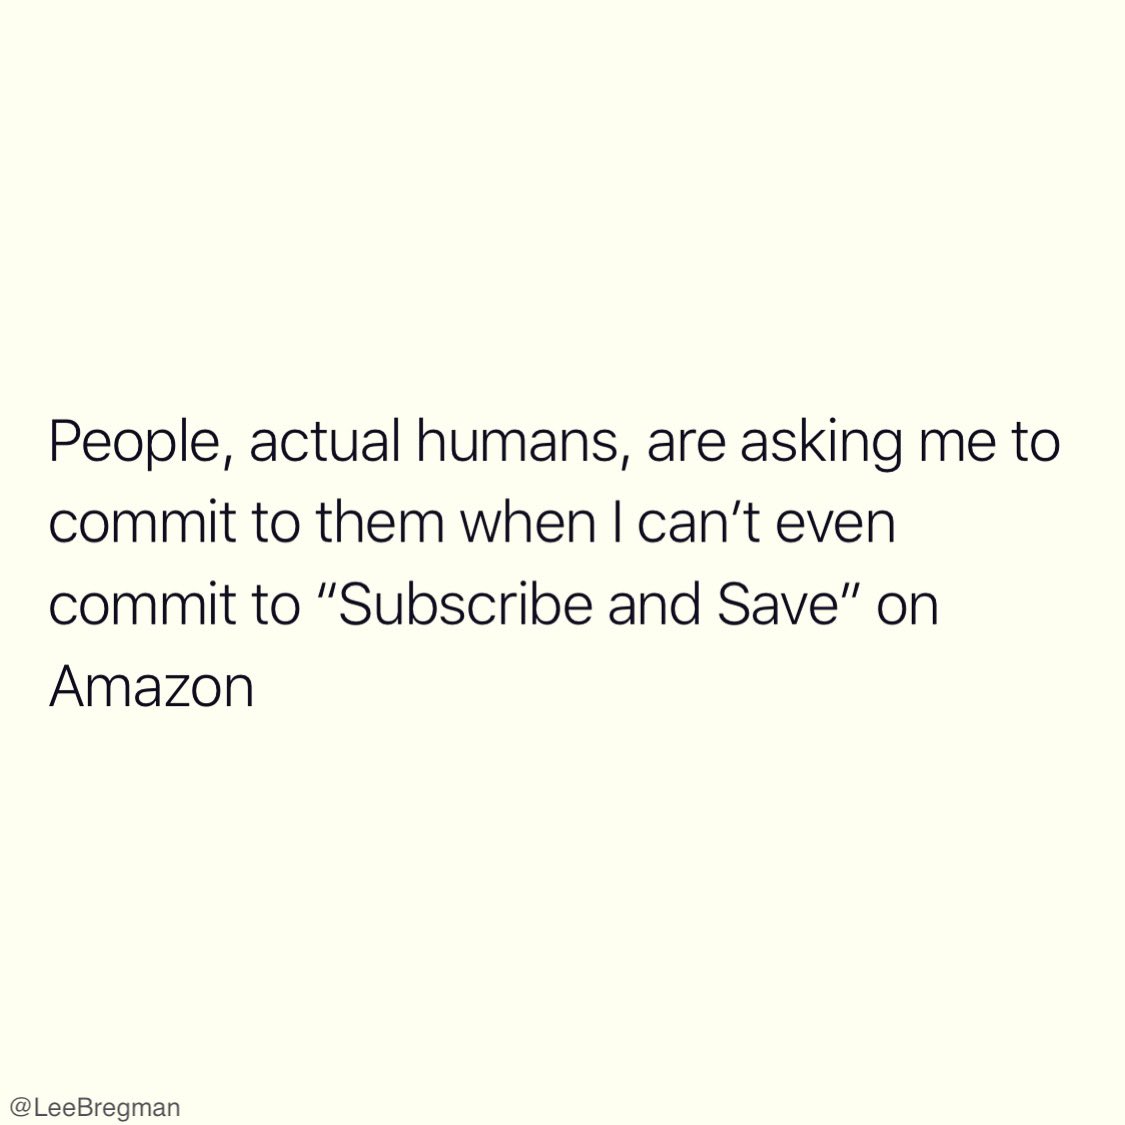 But what if I don’t need the same amount next month?
•
•
•
#commitment #commitments #commitmentissues #relationships #commit #committed #amazon #subscribeandsave #subscription